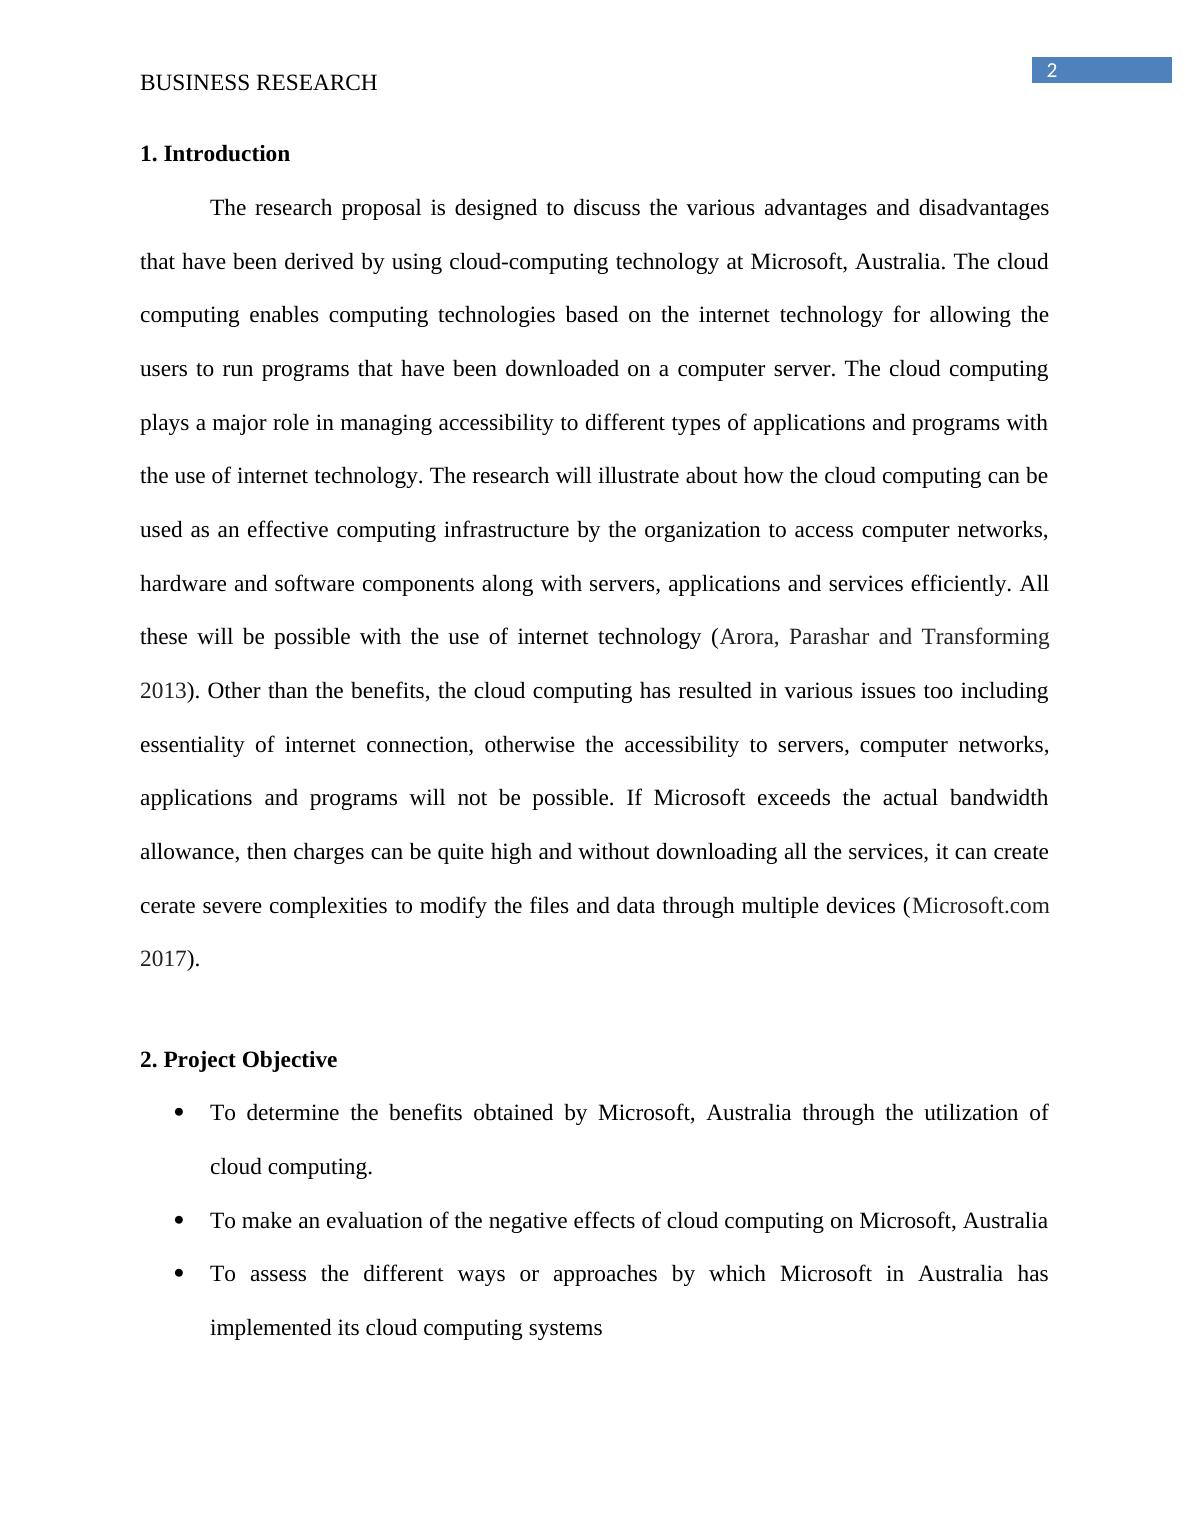 Research Proposal on Using Cloud-computing Technology_3